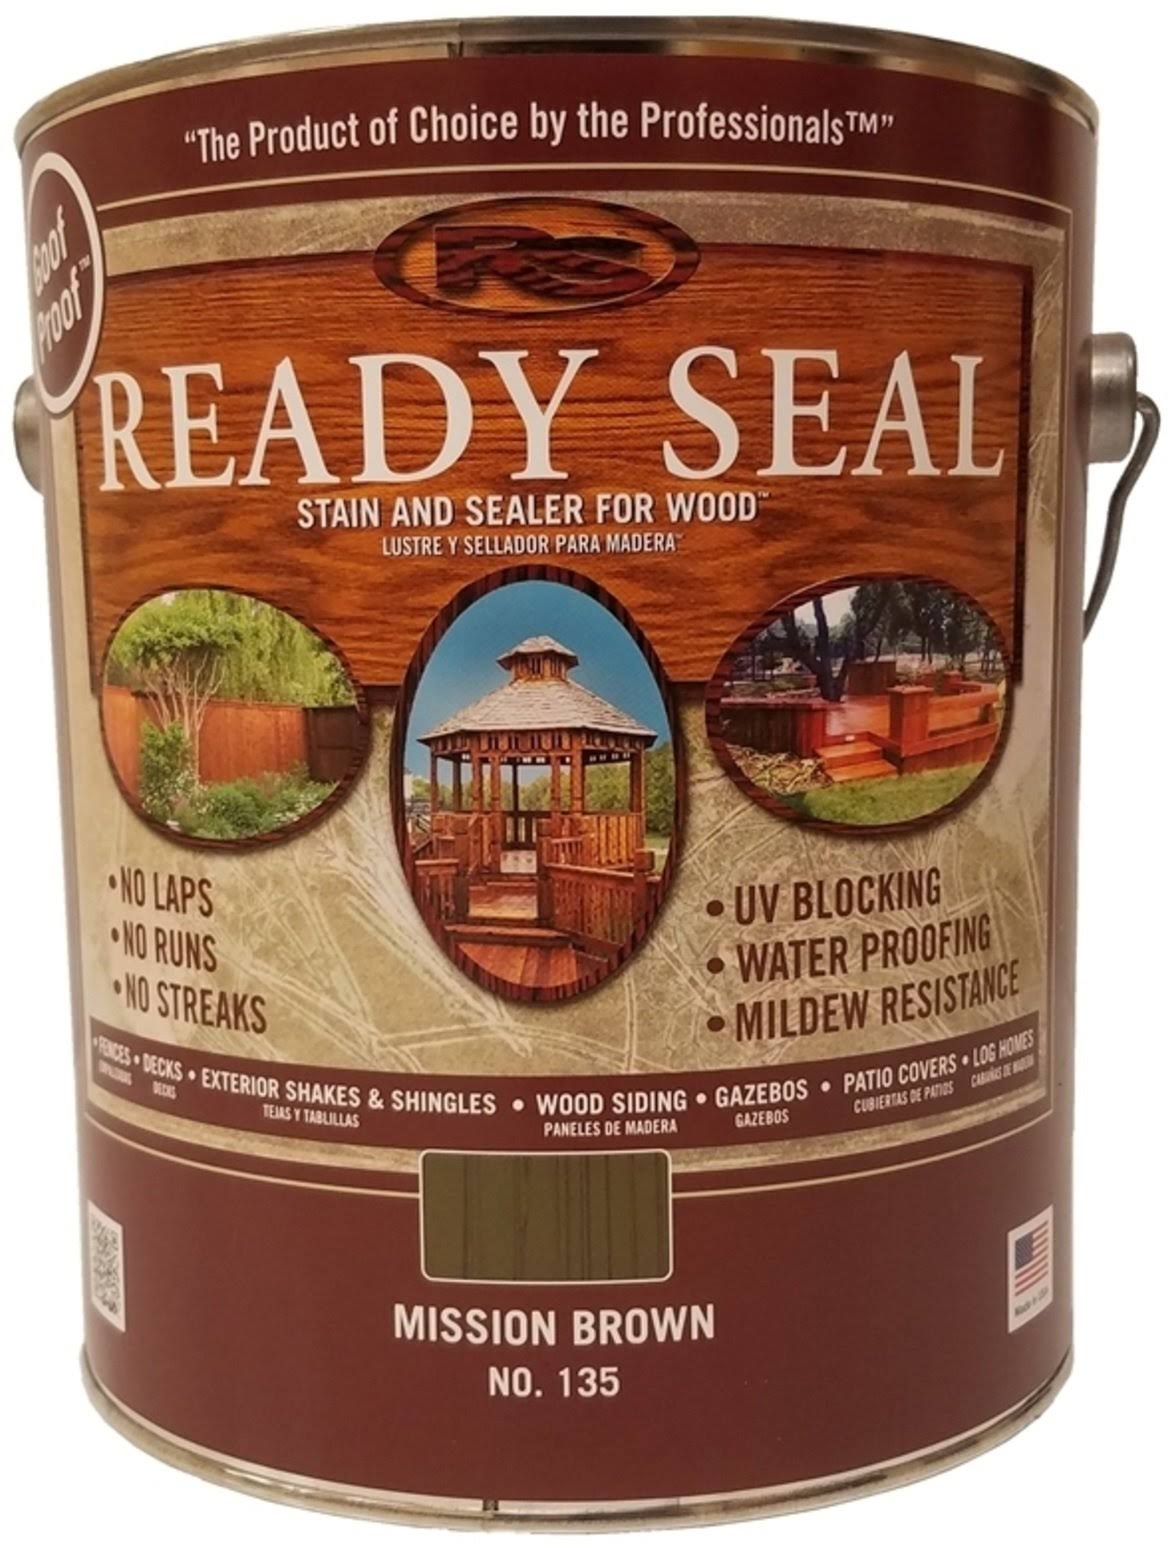 Ready Seal Exterior Wood Stain and Sealer - 1gal, Mission Brown